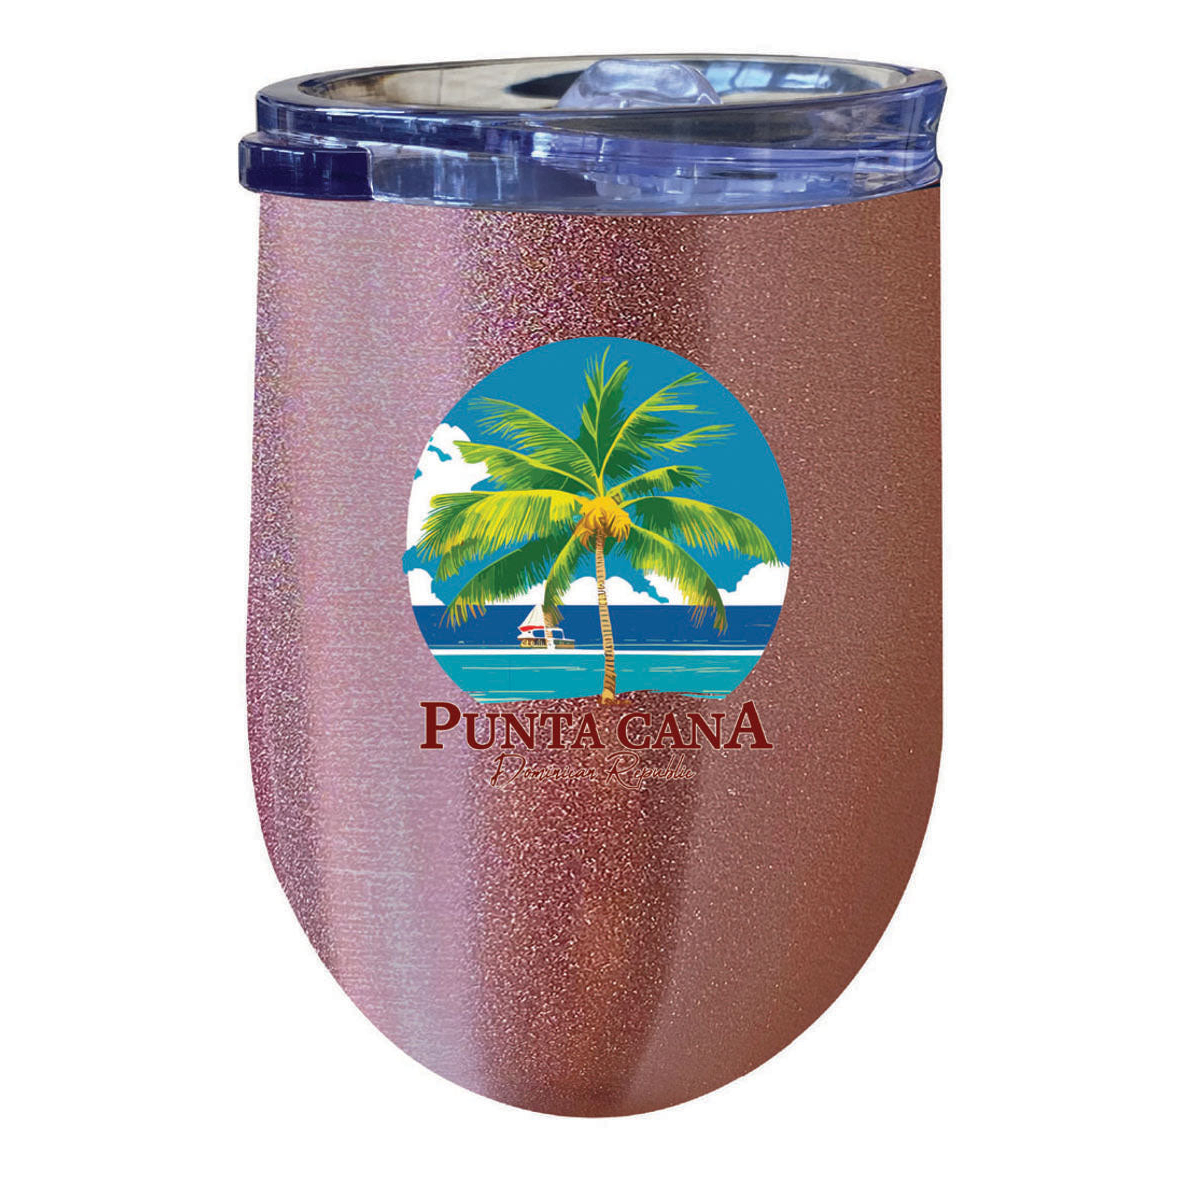 Punta Cana Dominican Republic Souvenir 12 Oz Insulated Wine Stainless Steel Tumbler - White, PARROT B